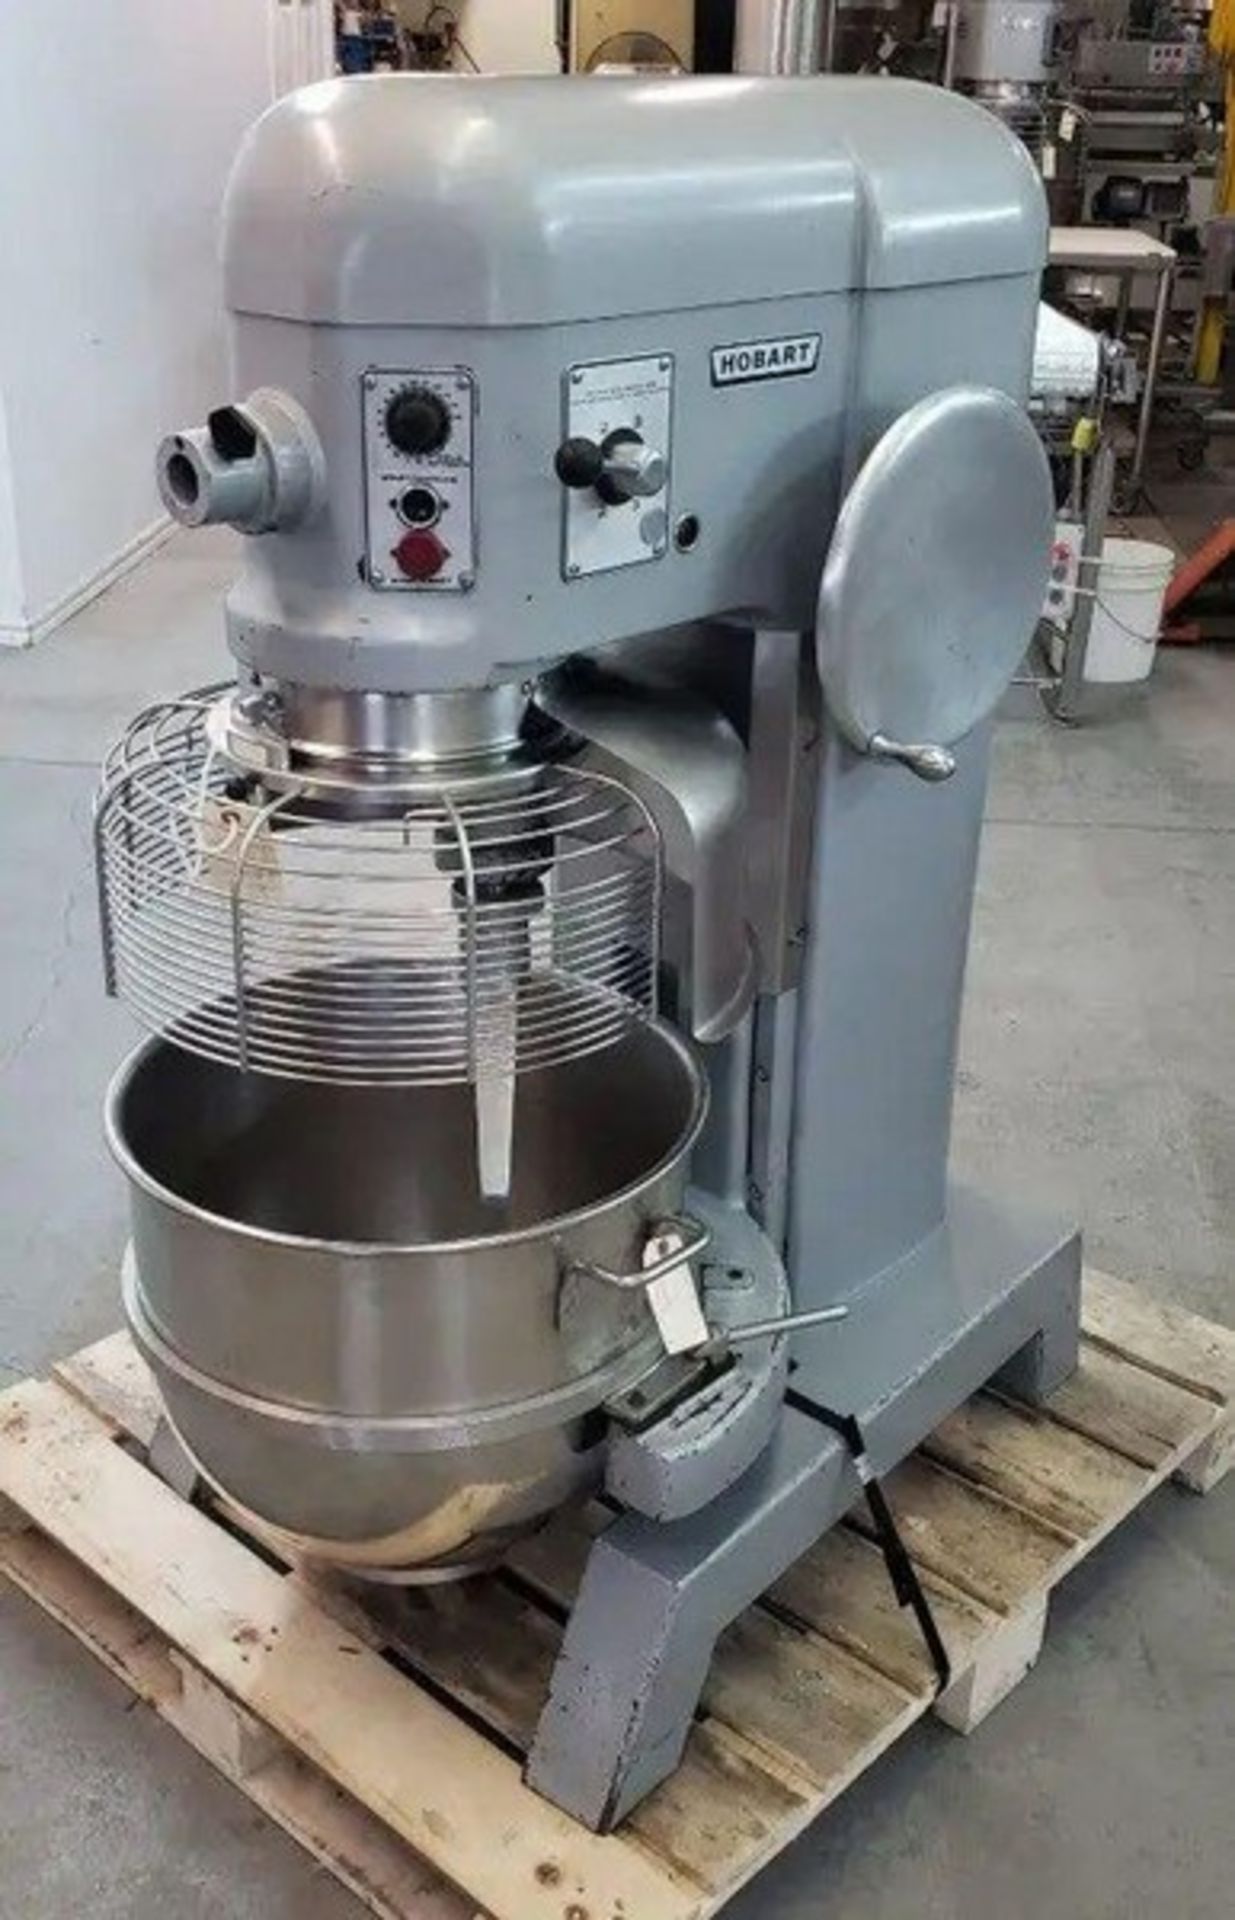 Hobart Mixer Model L-800 80 Quart Including Bowl and Dolly With Beater Arm and Hook Attachments in